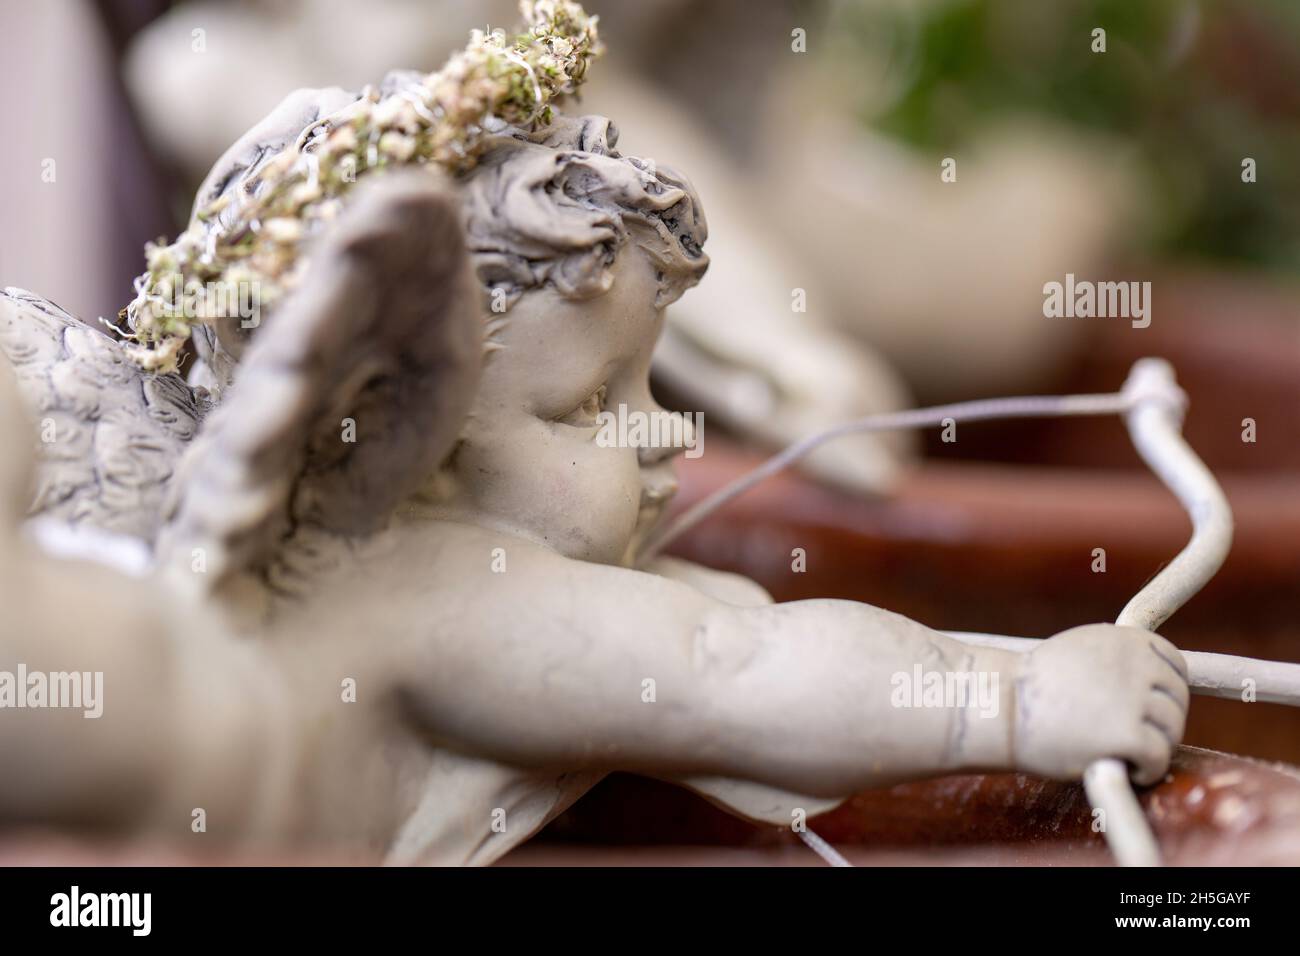 Figurine of amor aiming with bow and arrow Stock Photo